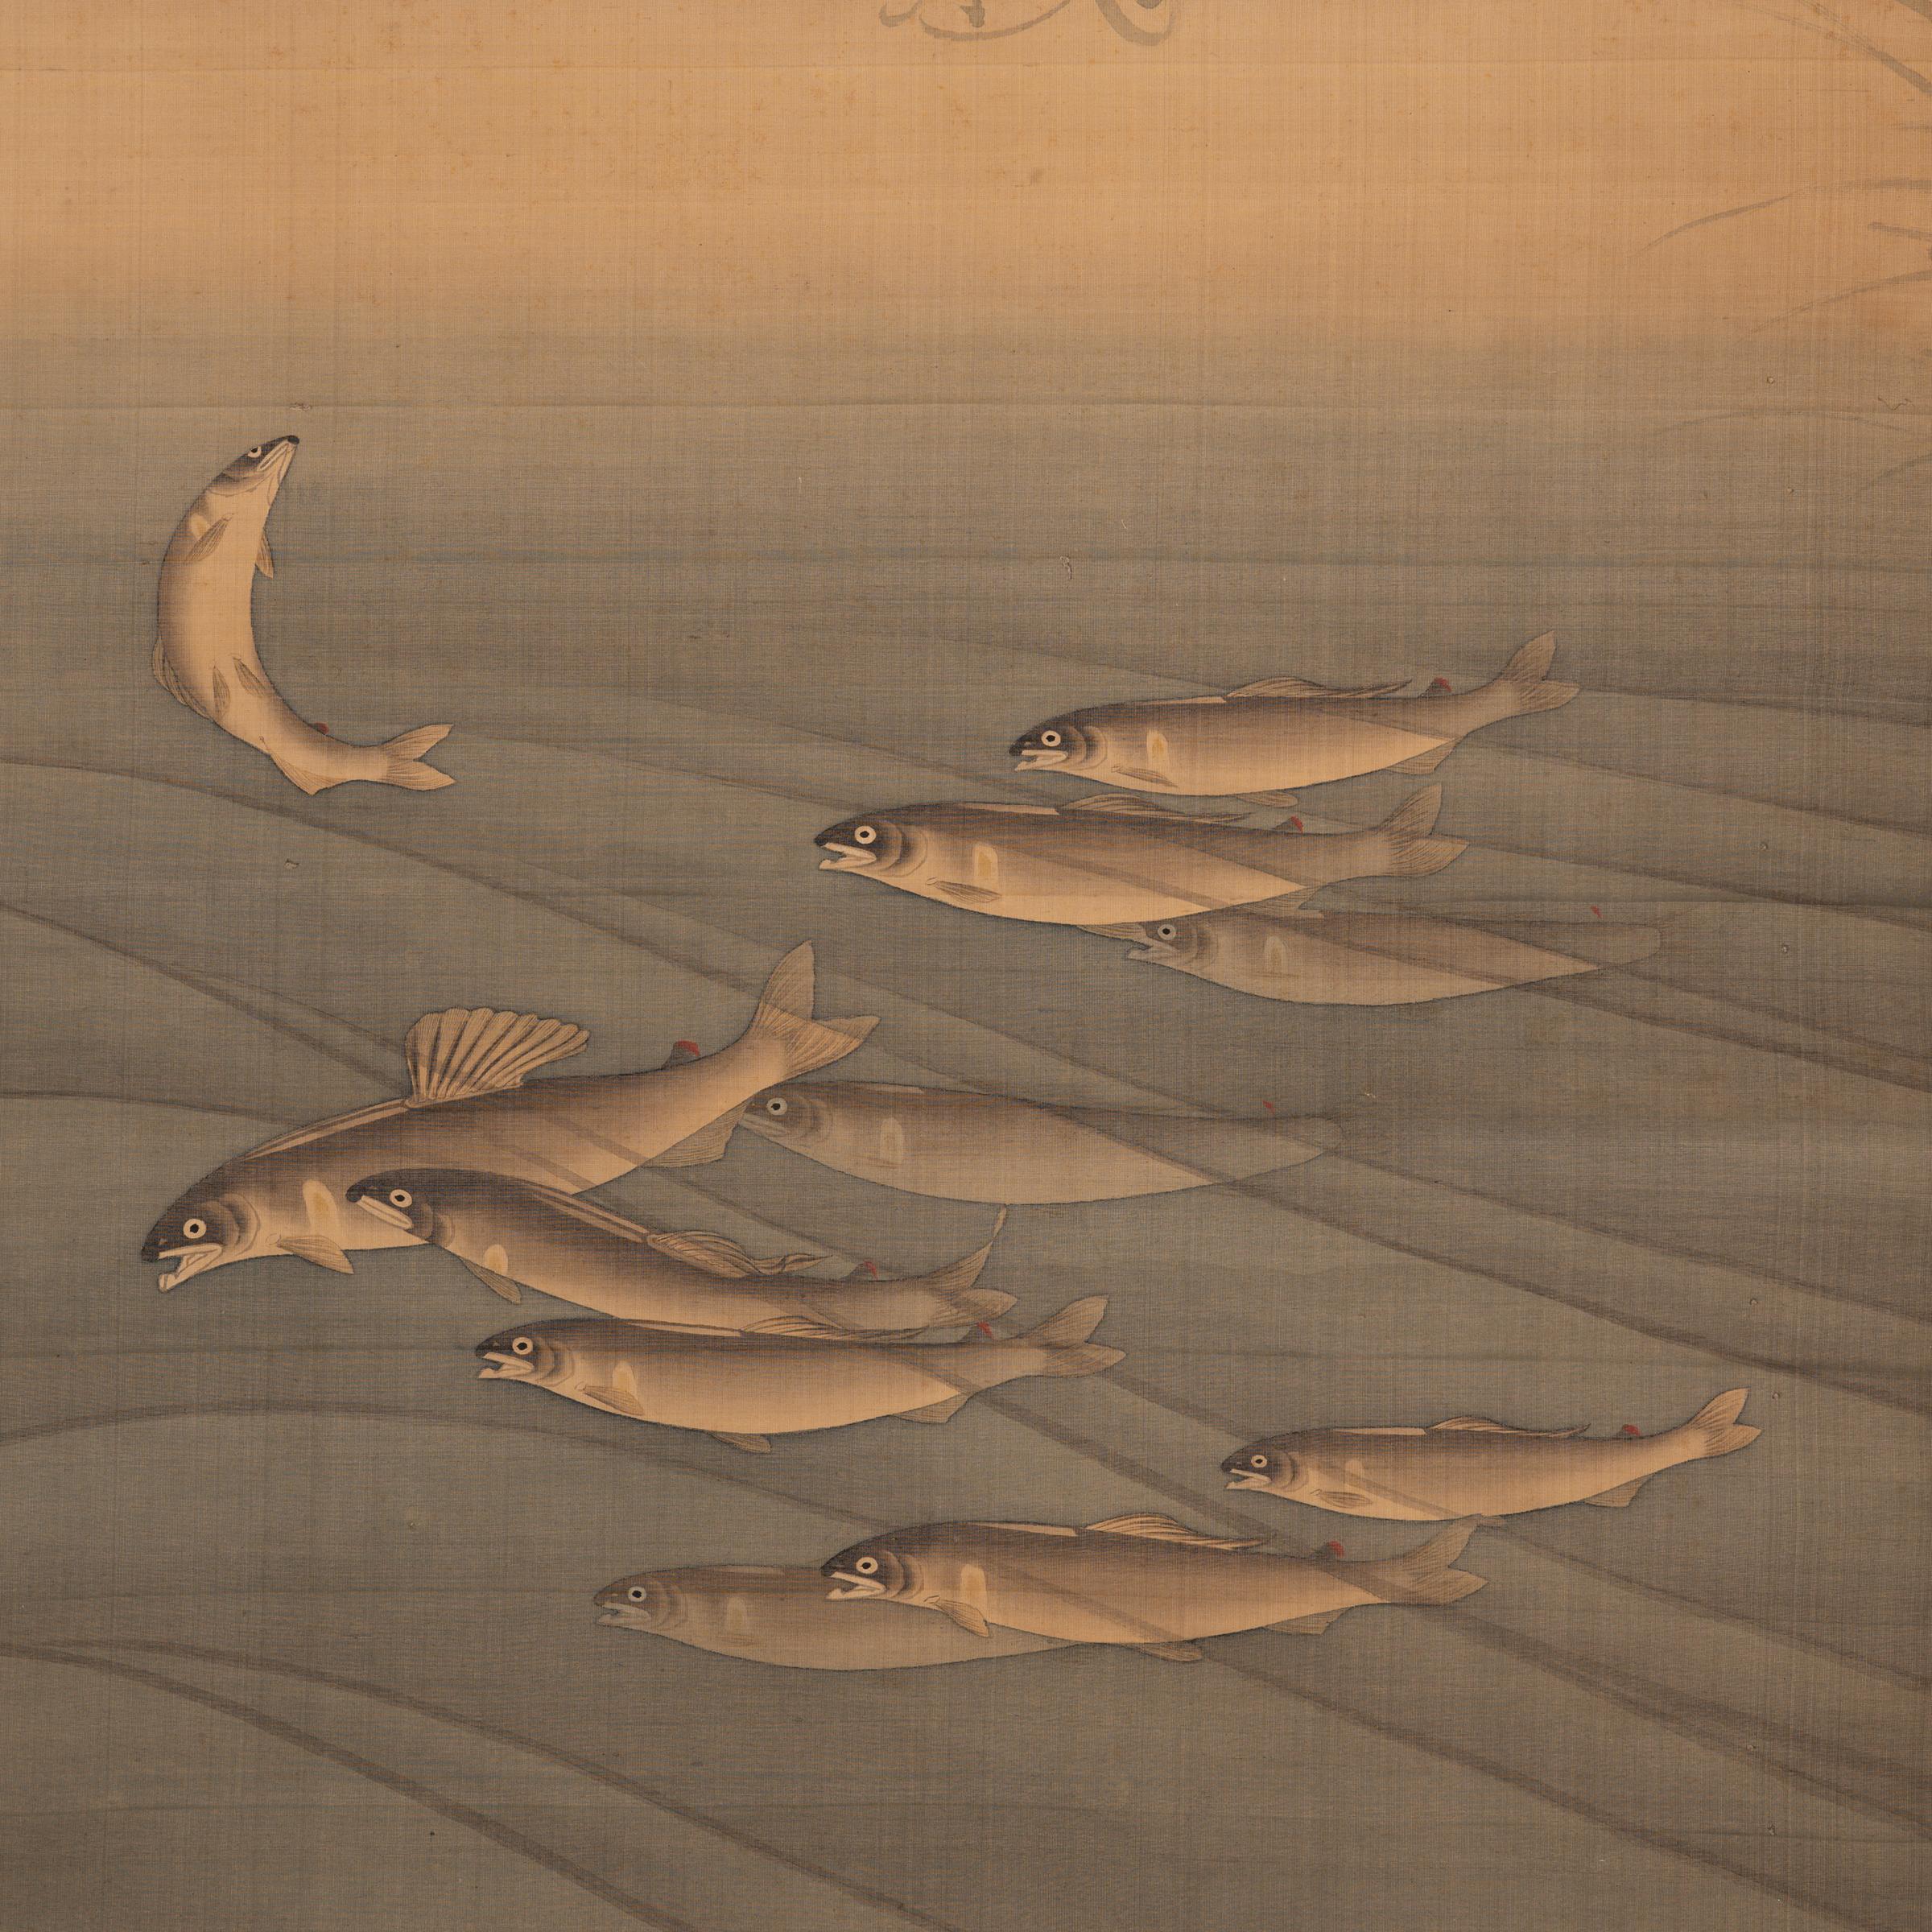 Japanese Meiji Hanging Scroll of Ayu Fish, c. 1850 - Art by Unknown